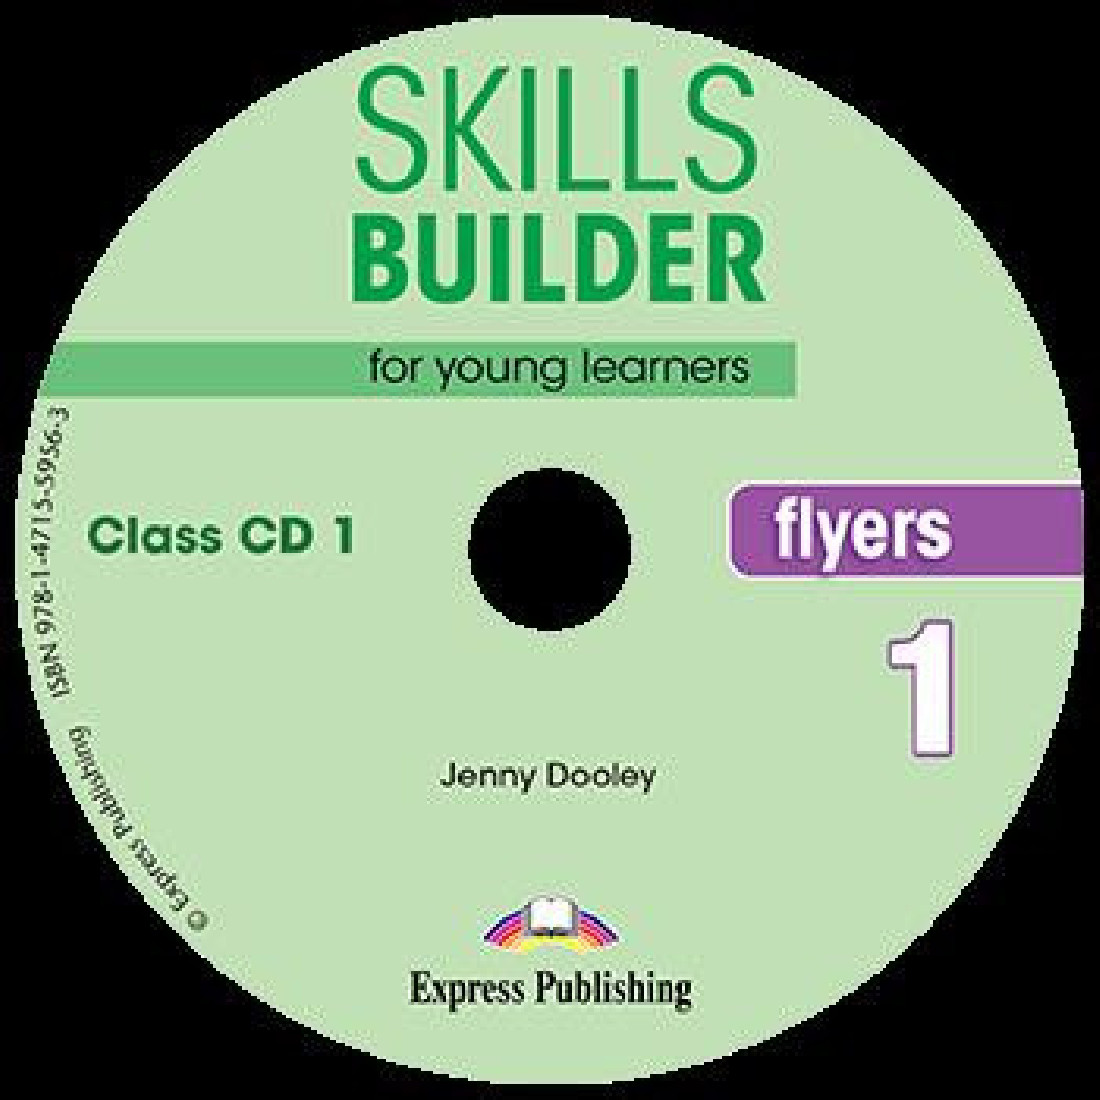 Skills Builder Flyers 1. Skills Builder for young Learners Flyers 2. Flyers Learners\. 1 Klasse CD.